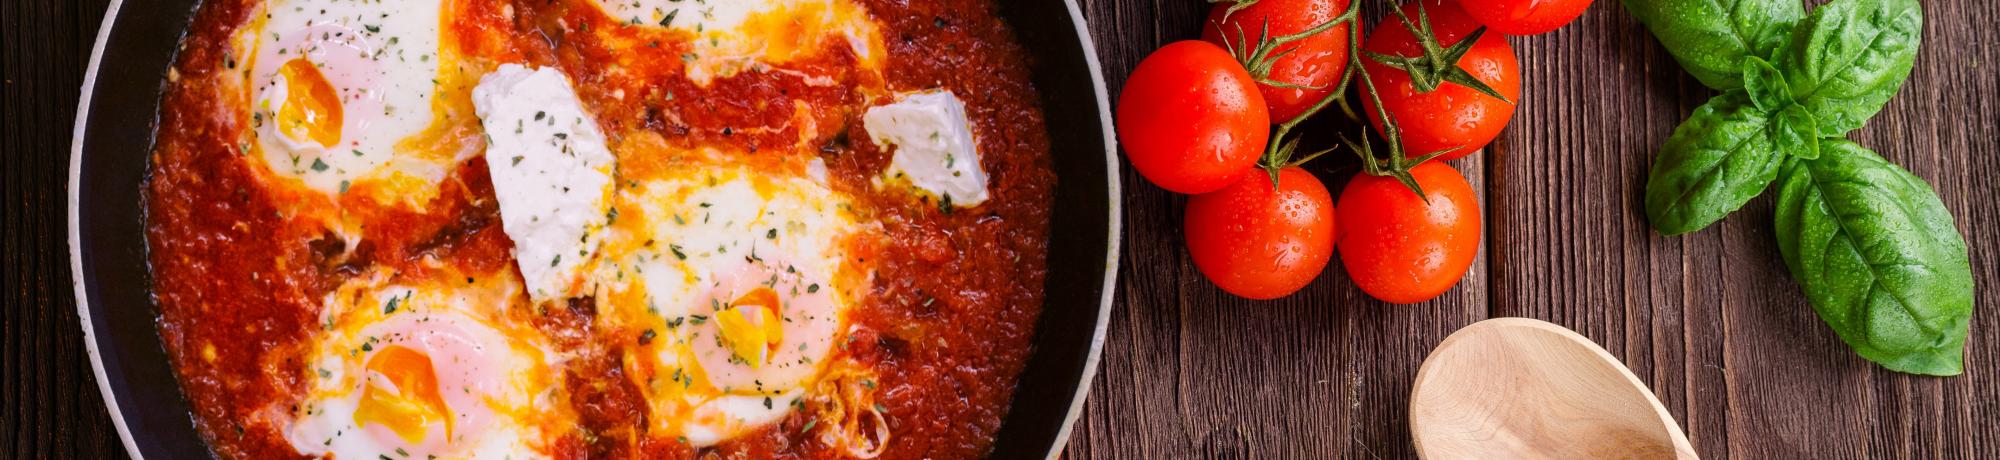 Pan with eggs in tomato sauce 